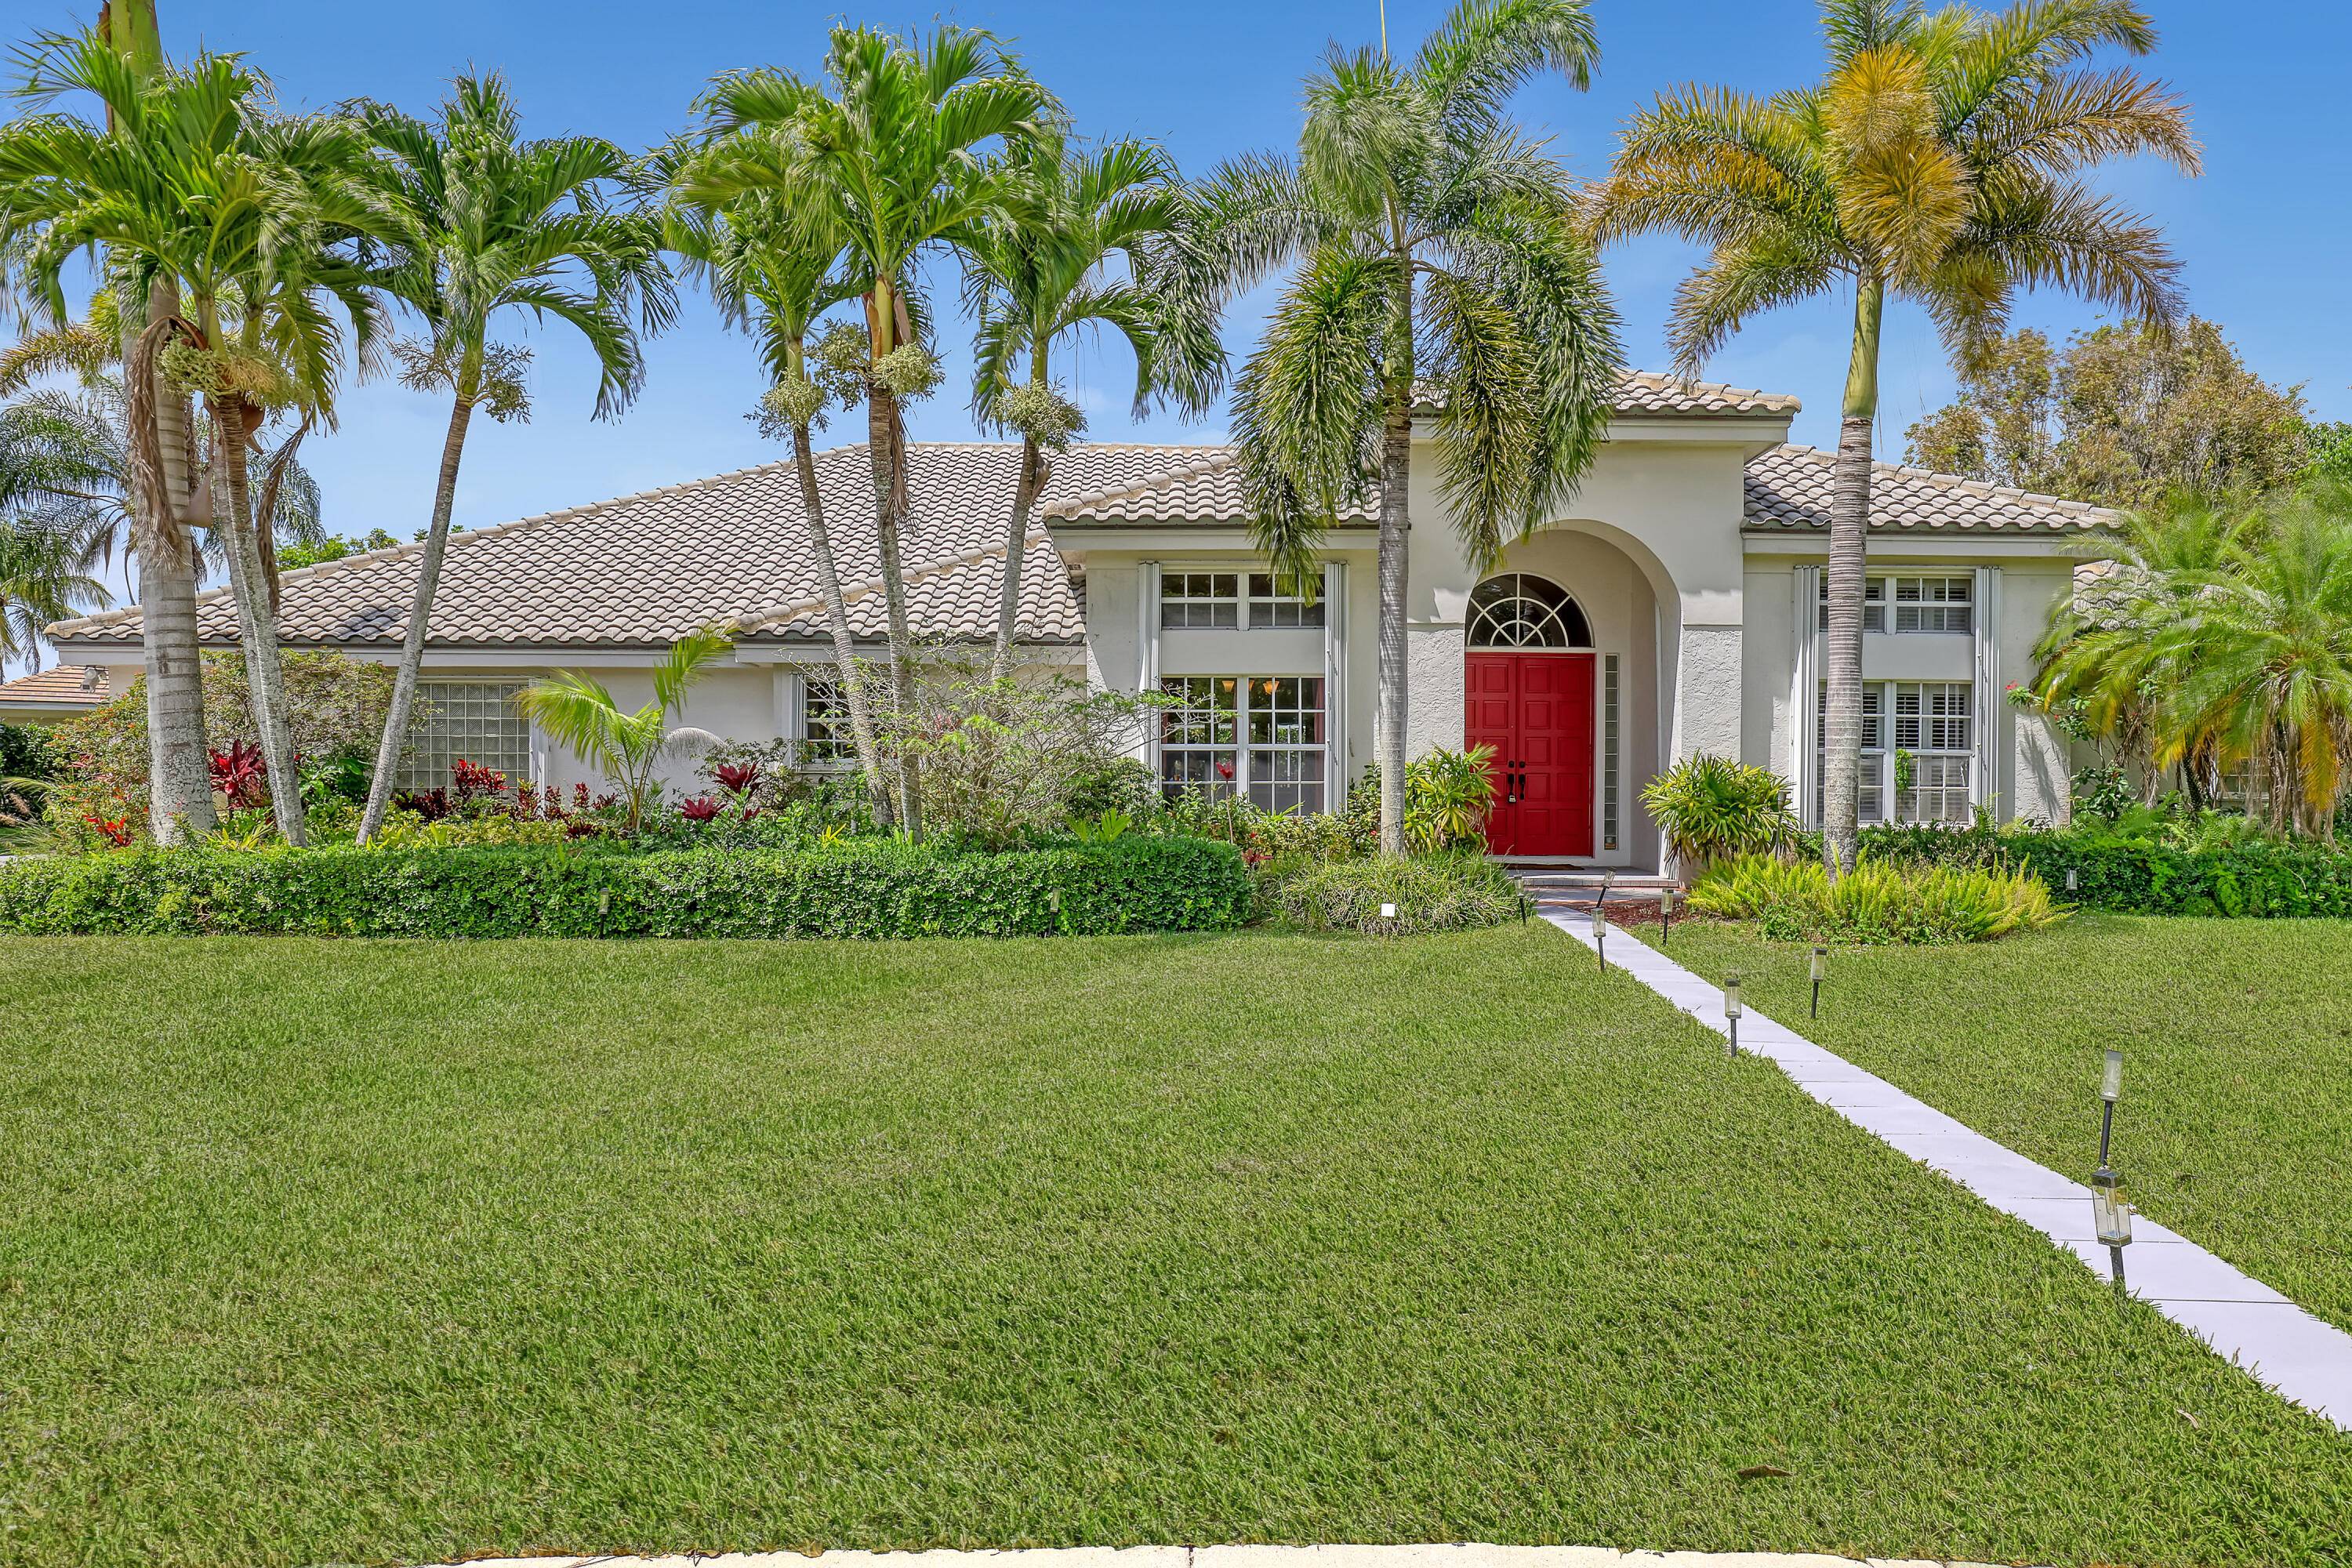 Welcome to this wonderful home located at the end of a cut de sac on an over sized lot !